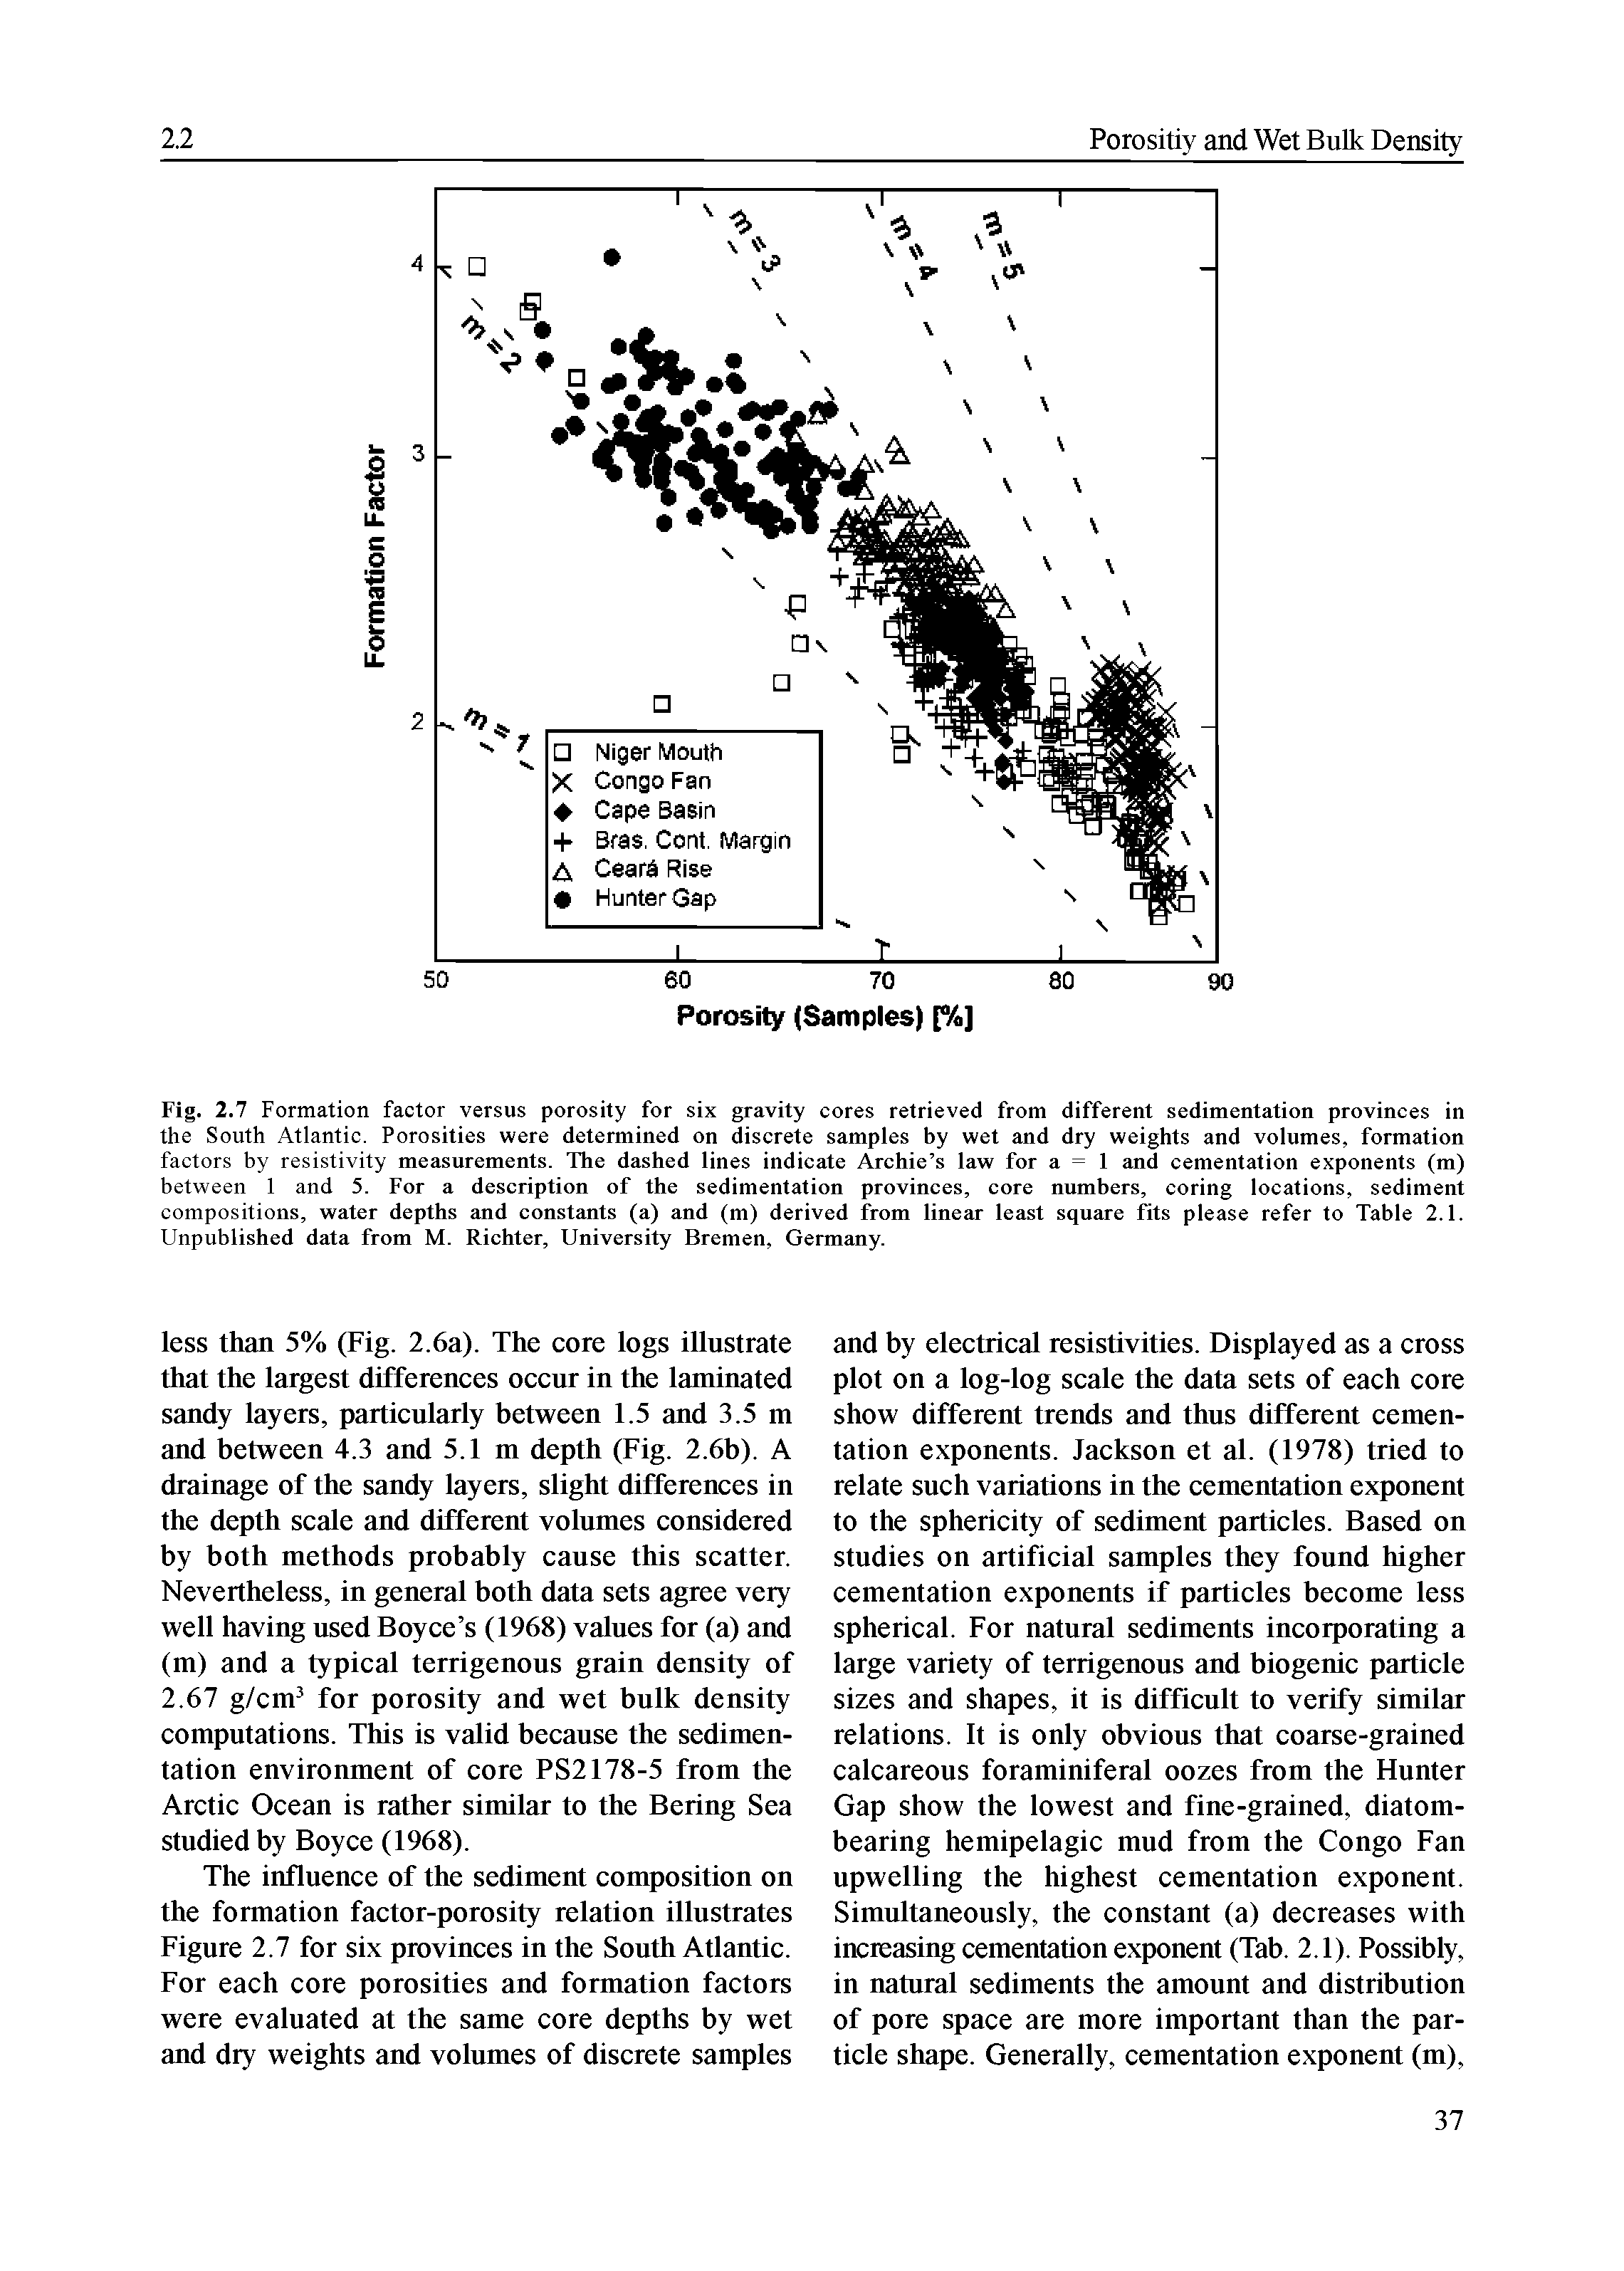 Fig. 2.7 Formation factor versus porosity for six gravity cores retrieved from different sedimentation provinces in the South Atlantic. Porosities were determined on discrete samples by wet and dry weights and volumes, formation factors by resistivity measurements. The dashed lines indicate Archie s law for a = 1 and cementation exponents (m) between 1 and 5. For a description of the sedimentation provinces, core numbers, coring locations, sediment compositions, water depths and constants (a) and (m) derived from linear least square fits please refer to Table 2.1. Unpublished data from M. Richter, University Bremen, Germany.